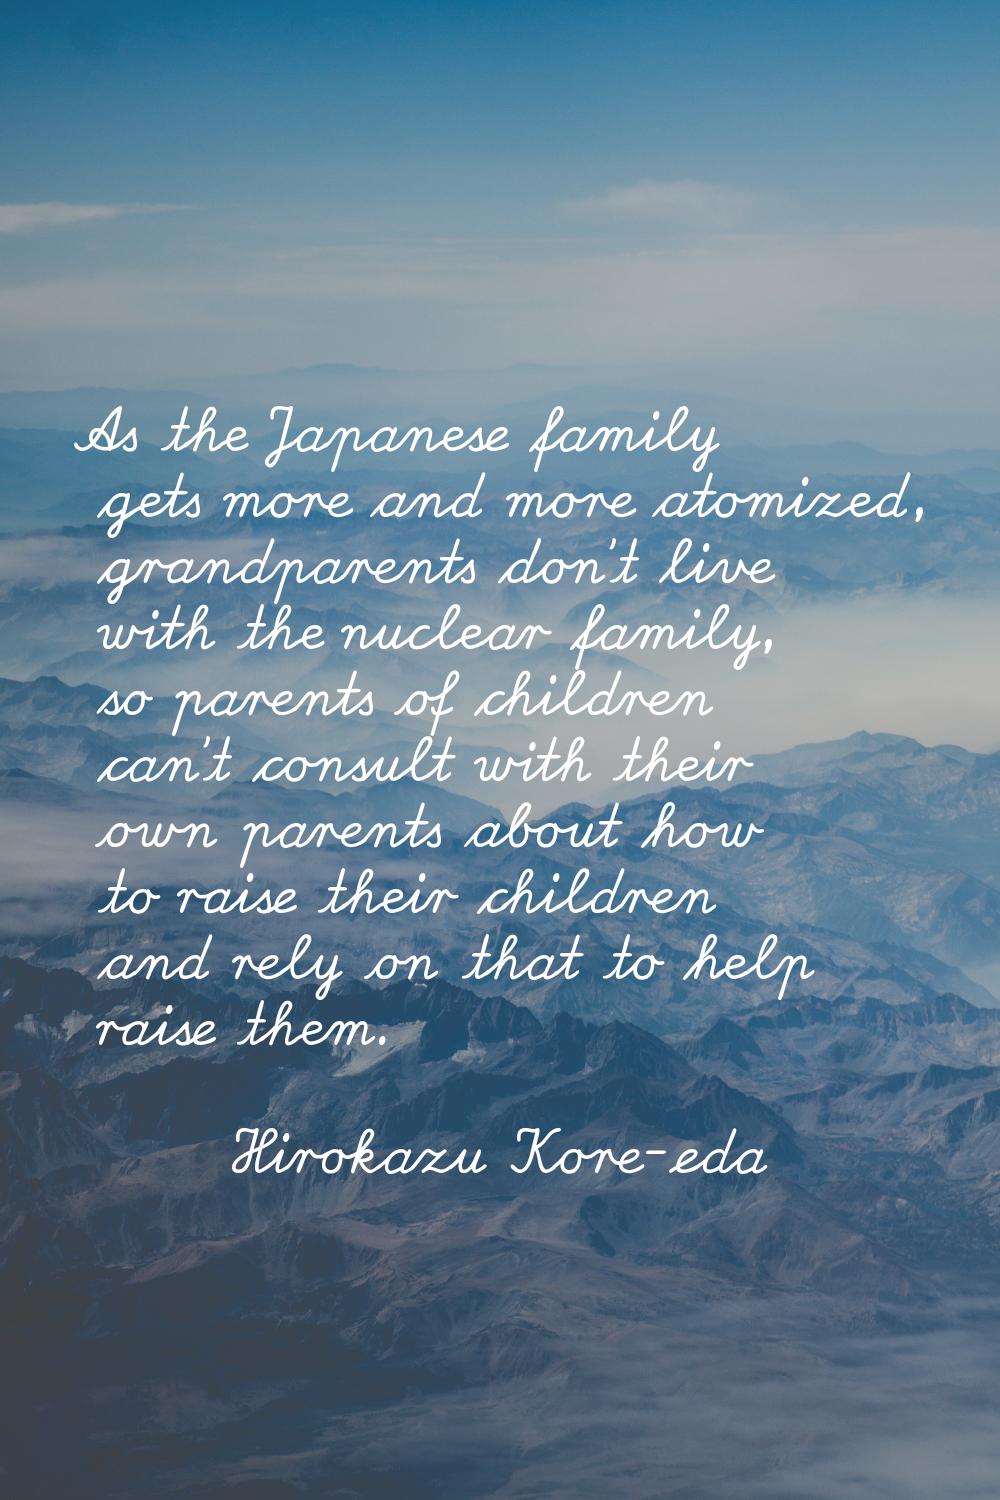 As the Japanese family gets more and more atomized, grandparents don't live with the nuclear family